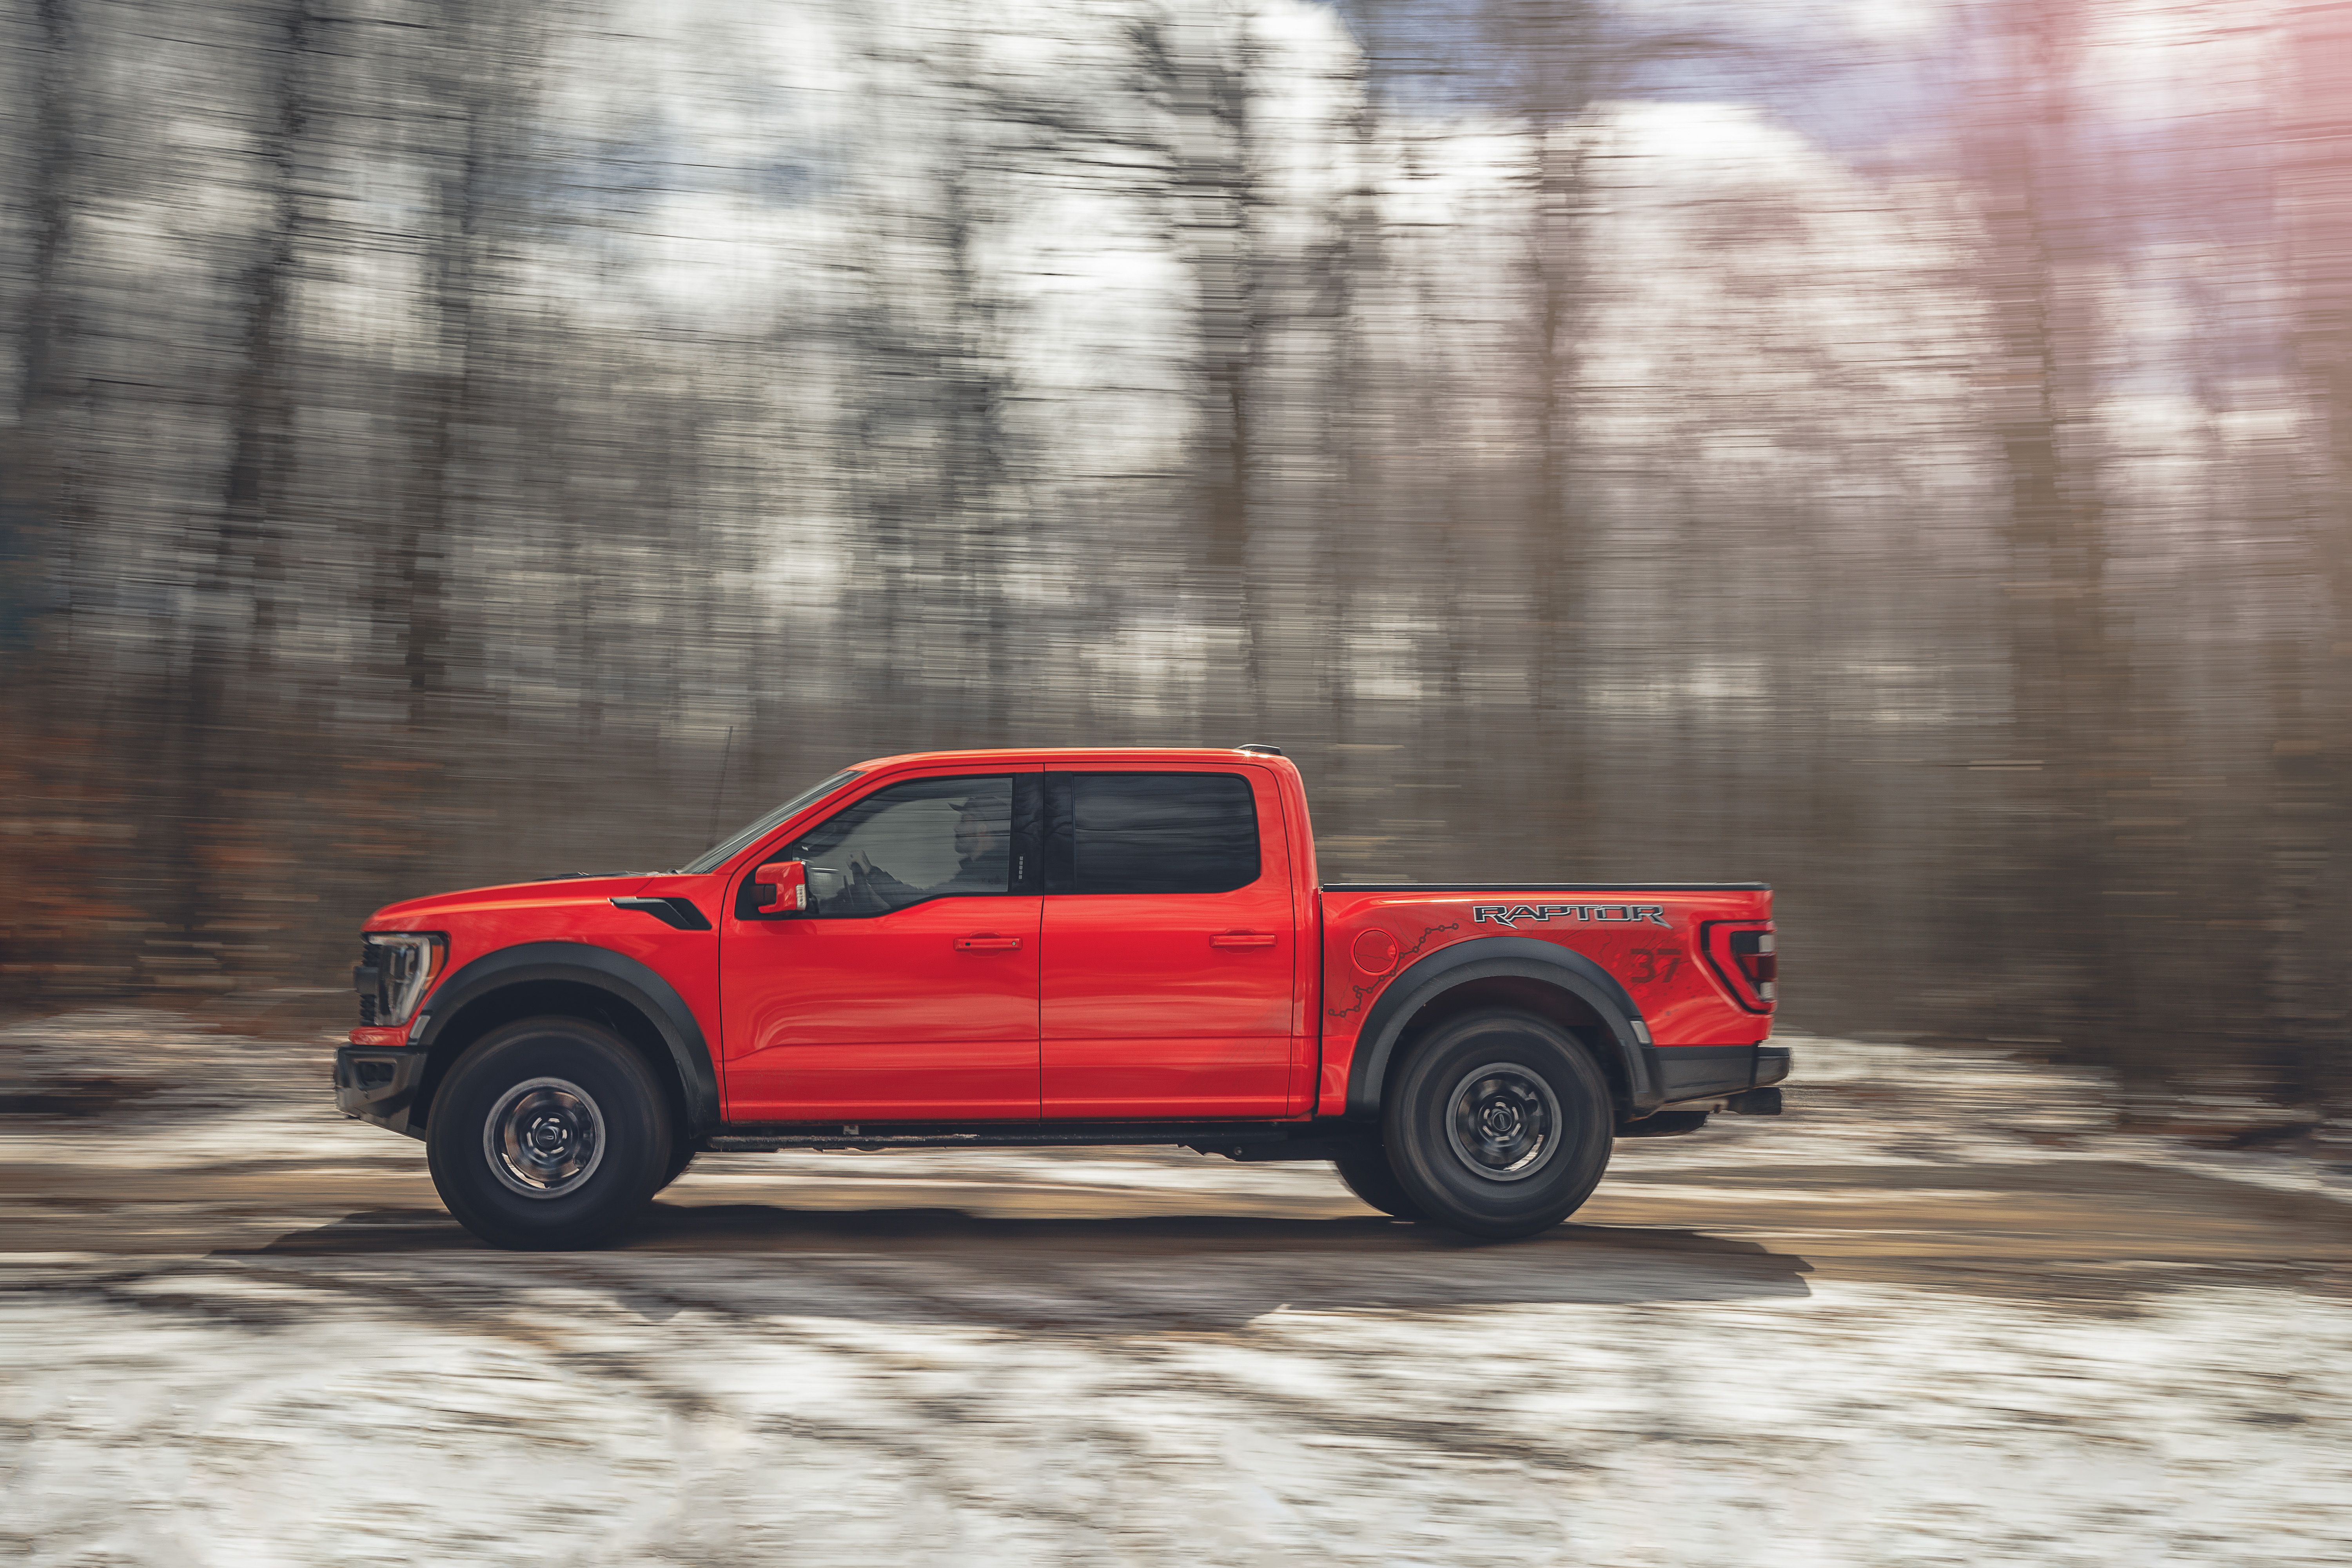 Ford's Raptor R requires plenty of dead dinosaurs: New F-150 is